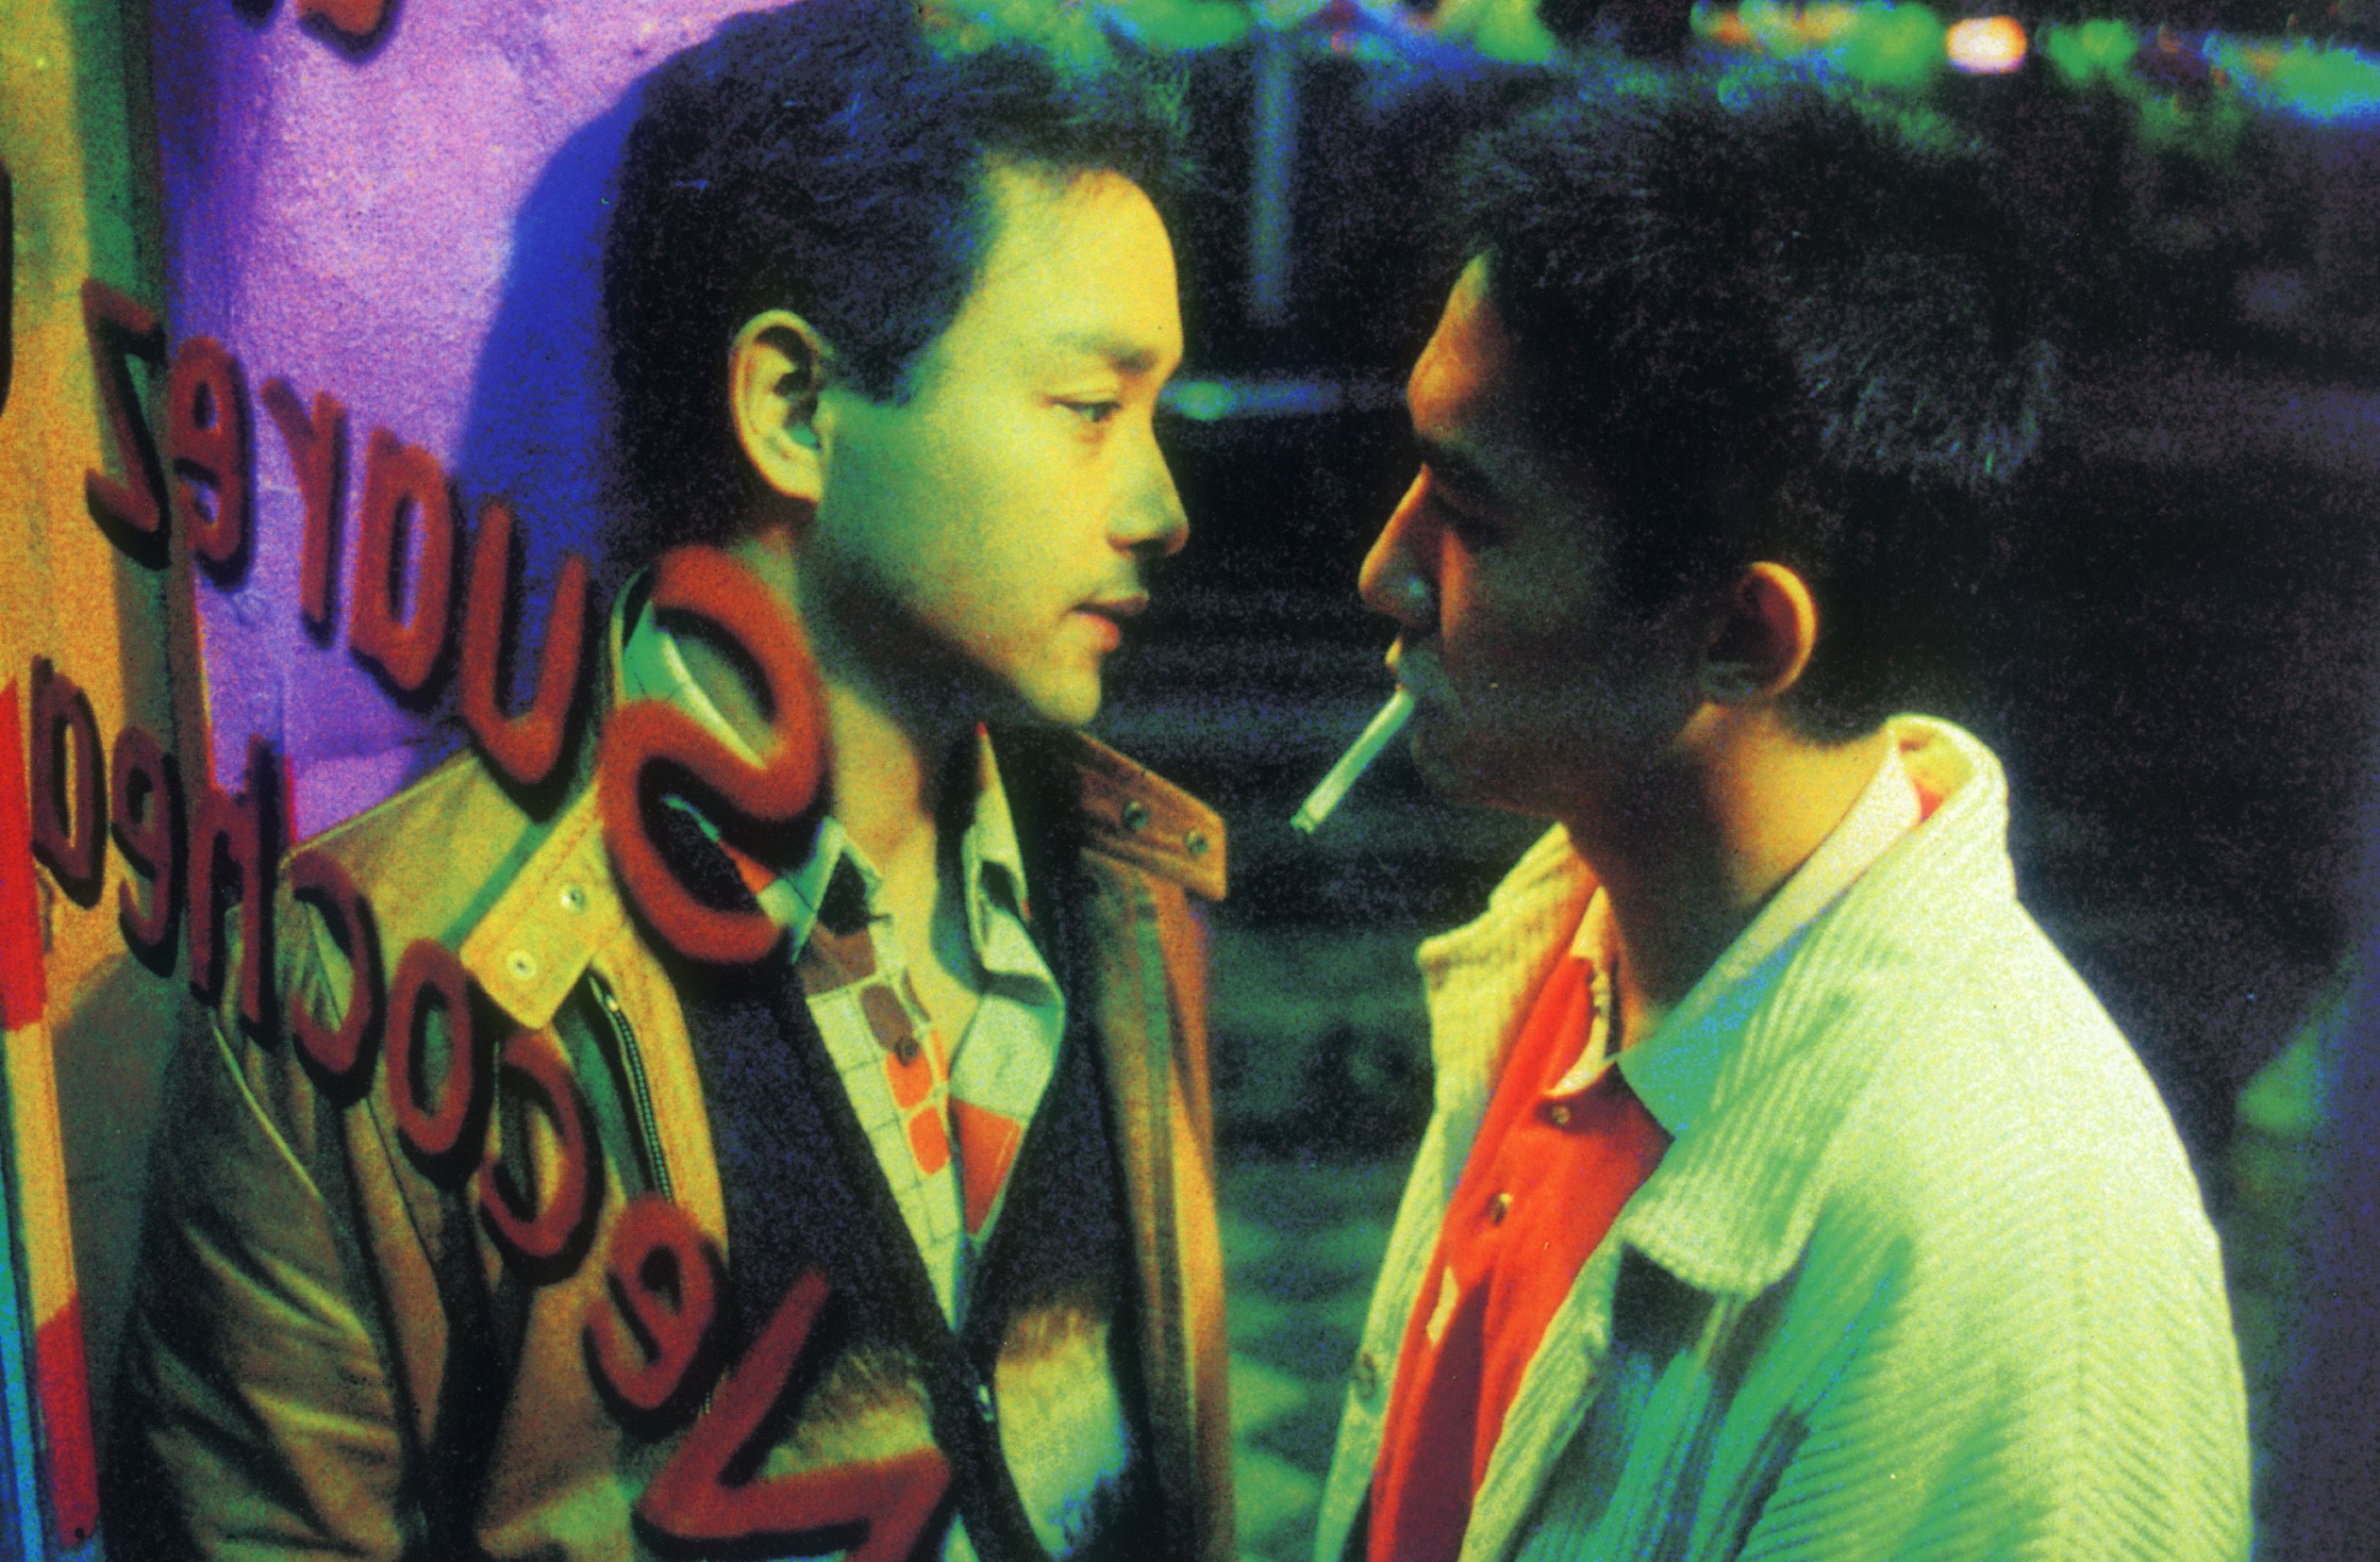 Leslie Cheung (left) and Tony Leung in a still from Happy Together.